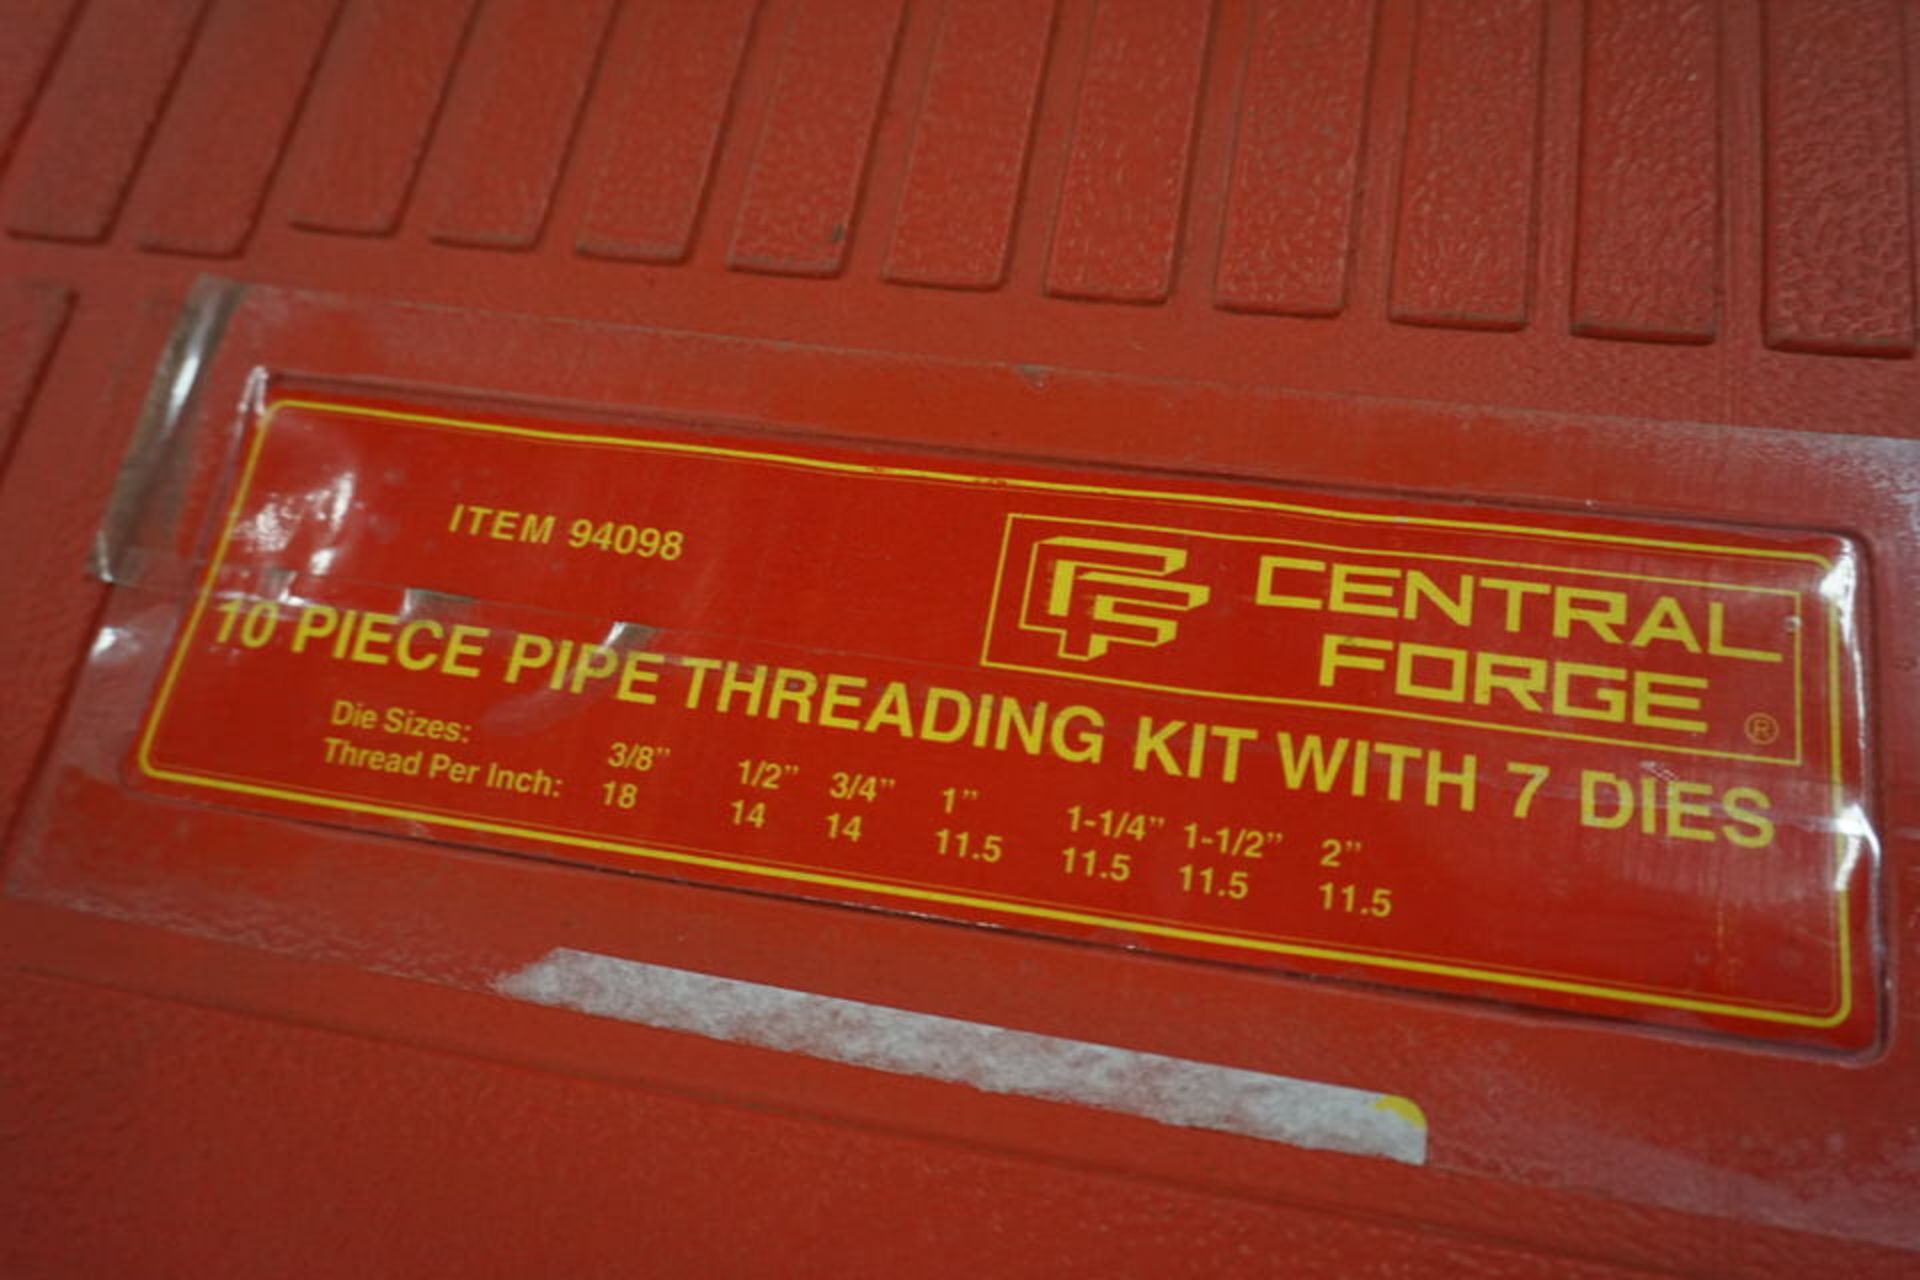 CENTRAL FORGE PIPE THREADING KIT 3/8" TO 2" CAP - Image 3 of 3